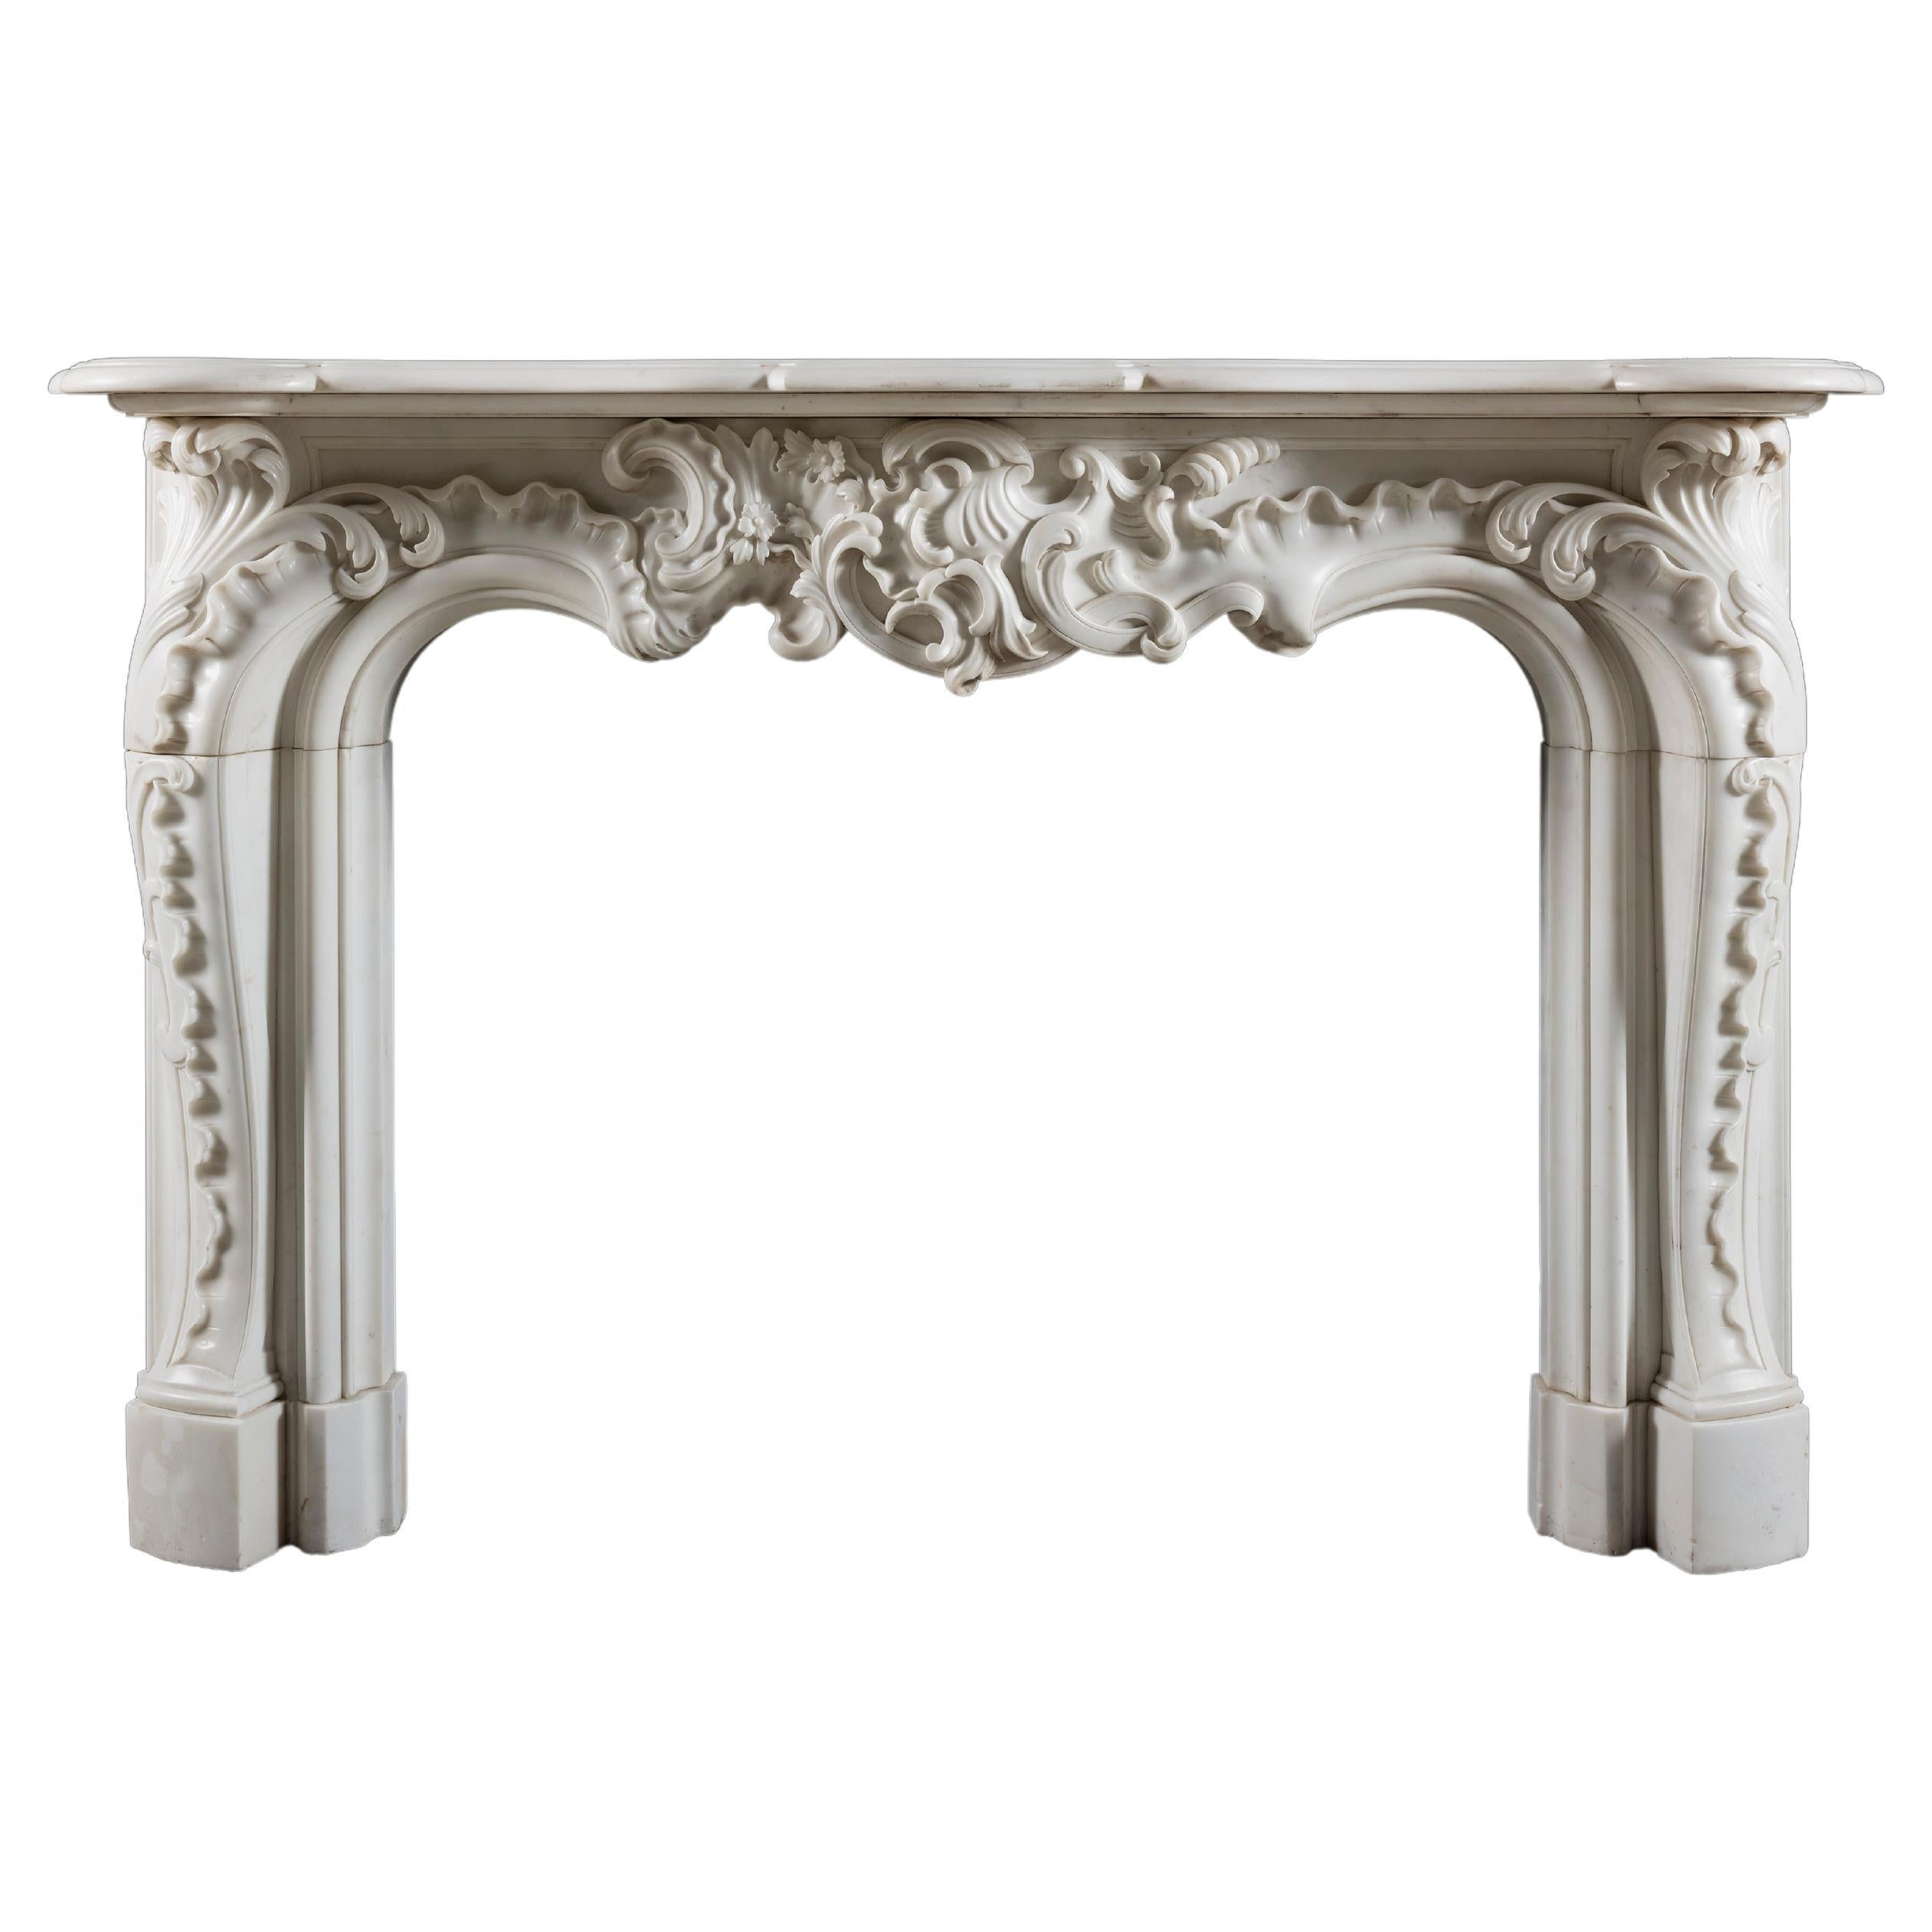 Rococo Revival Fireplaces and Mantels